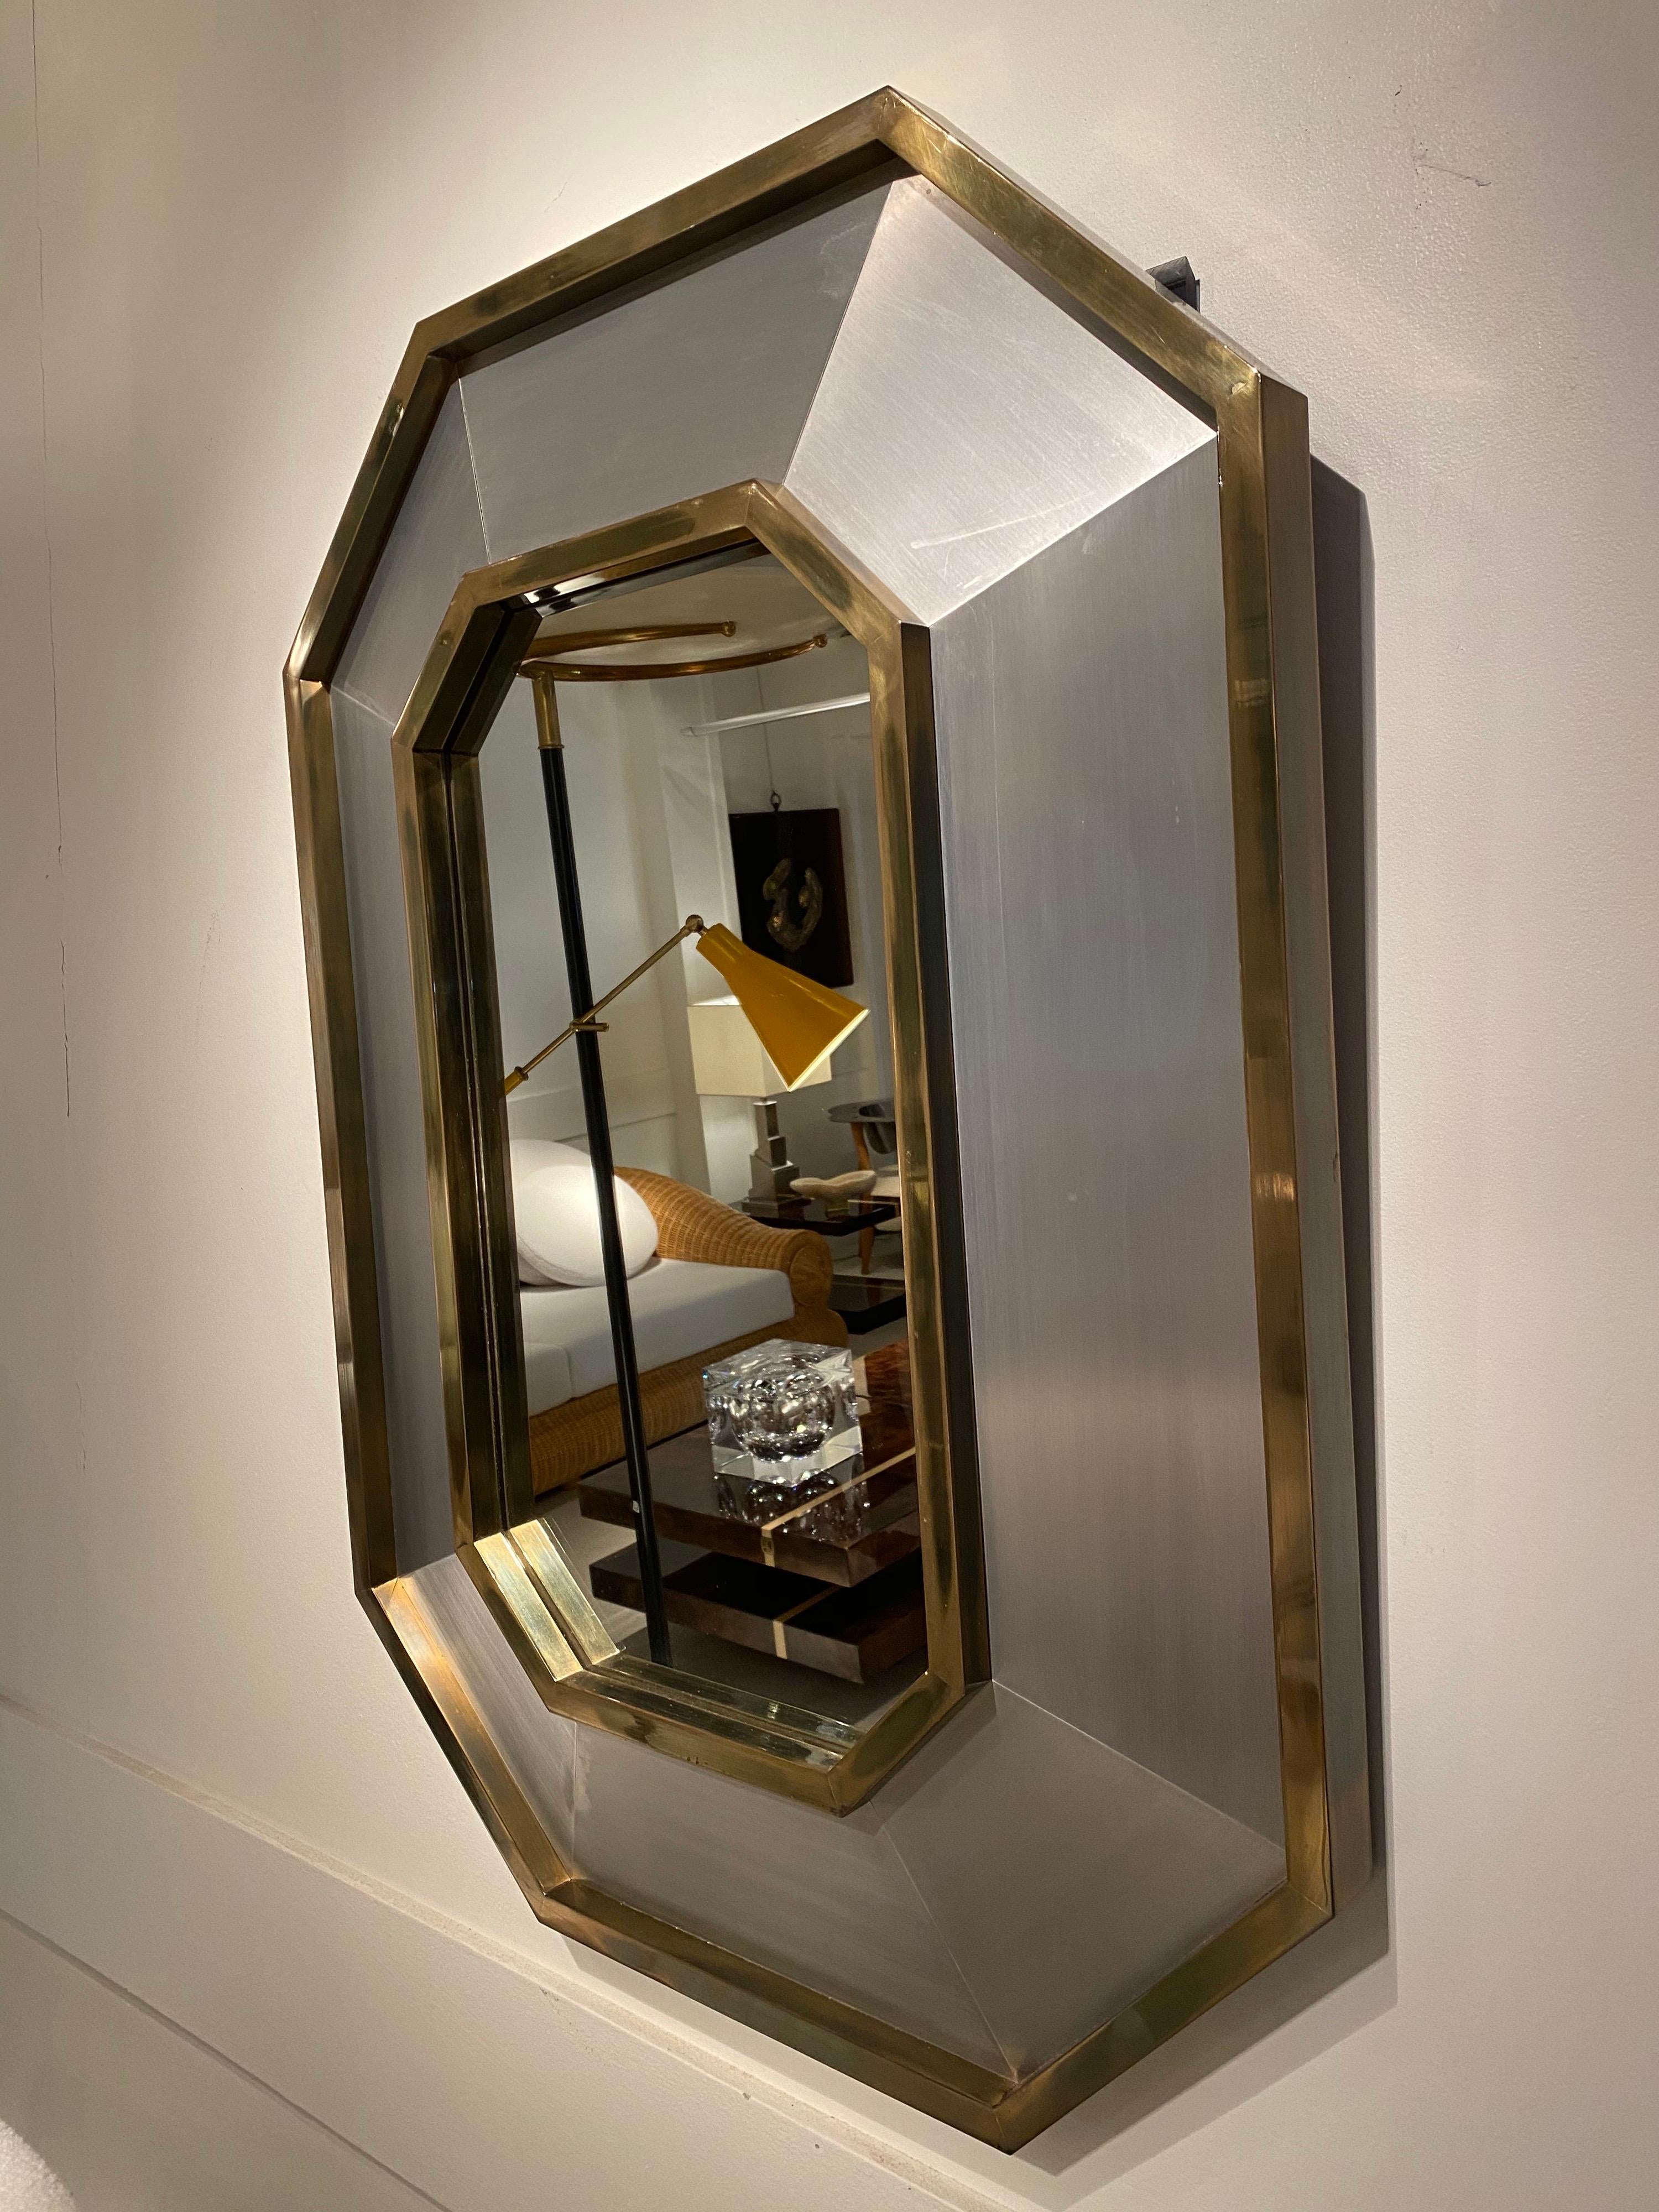 1970s Maison Jansen mirror in brushed steel and brass details
Great vintage condition